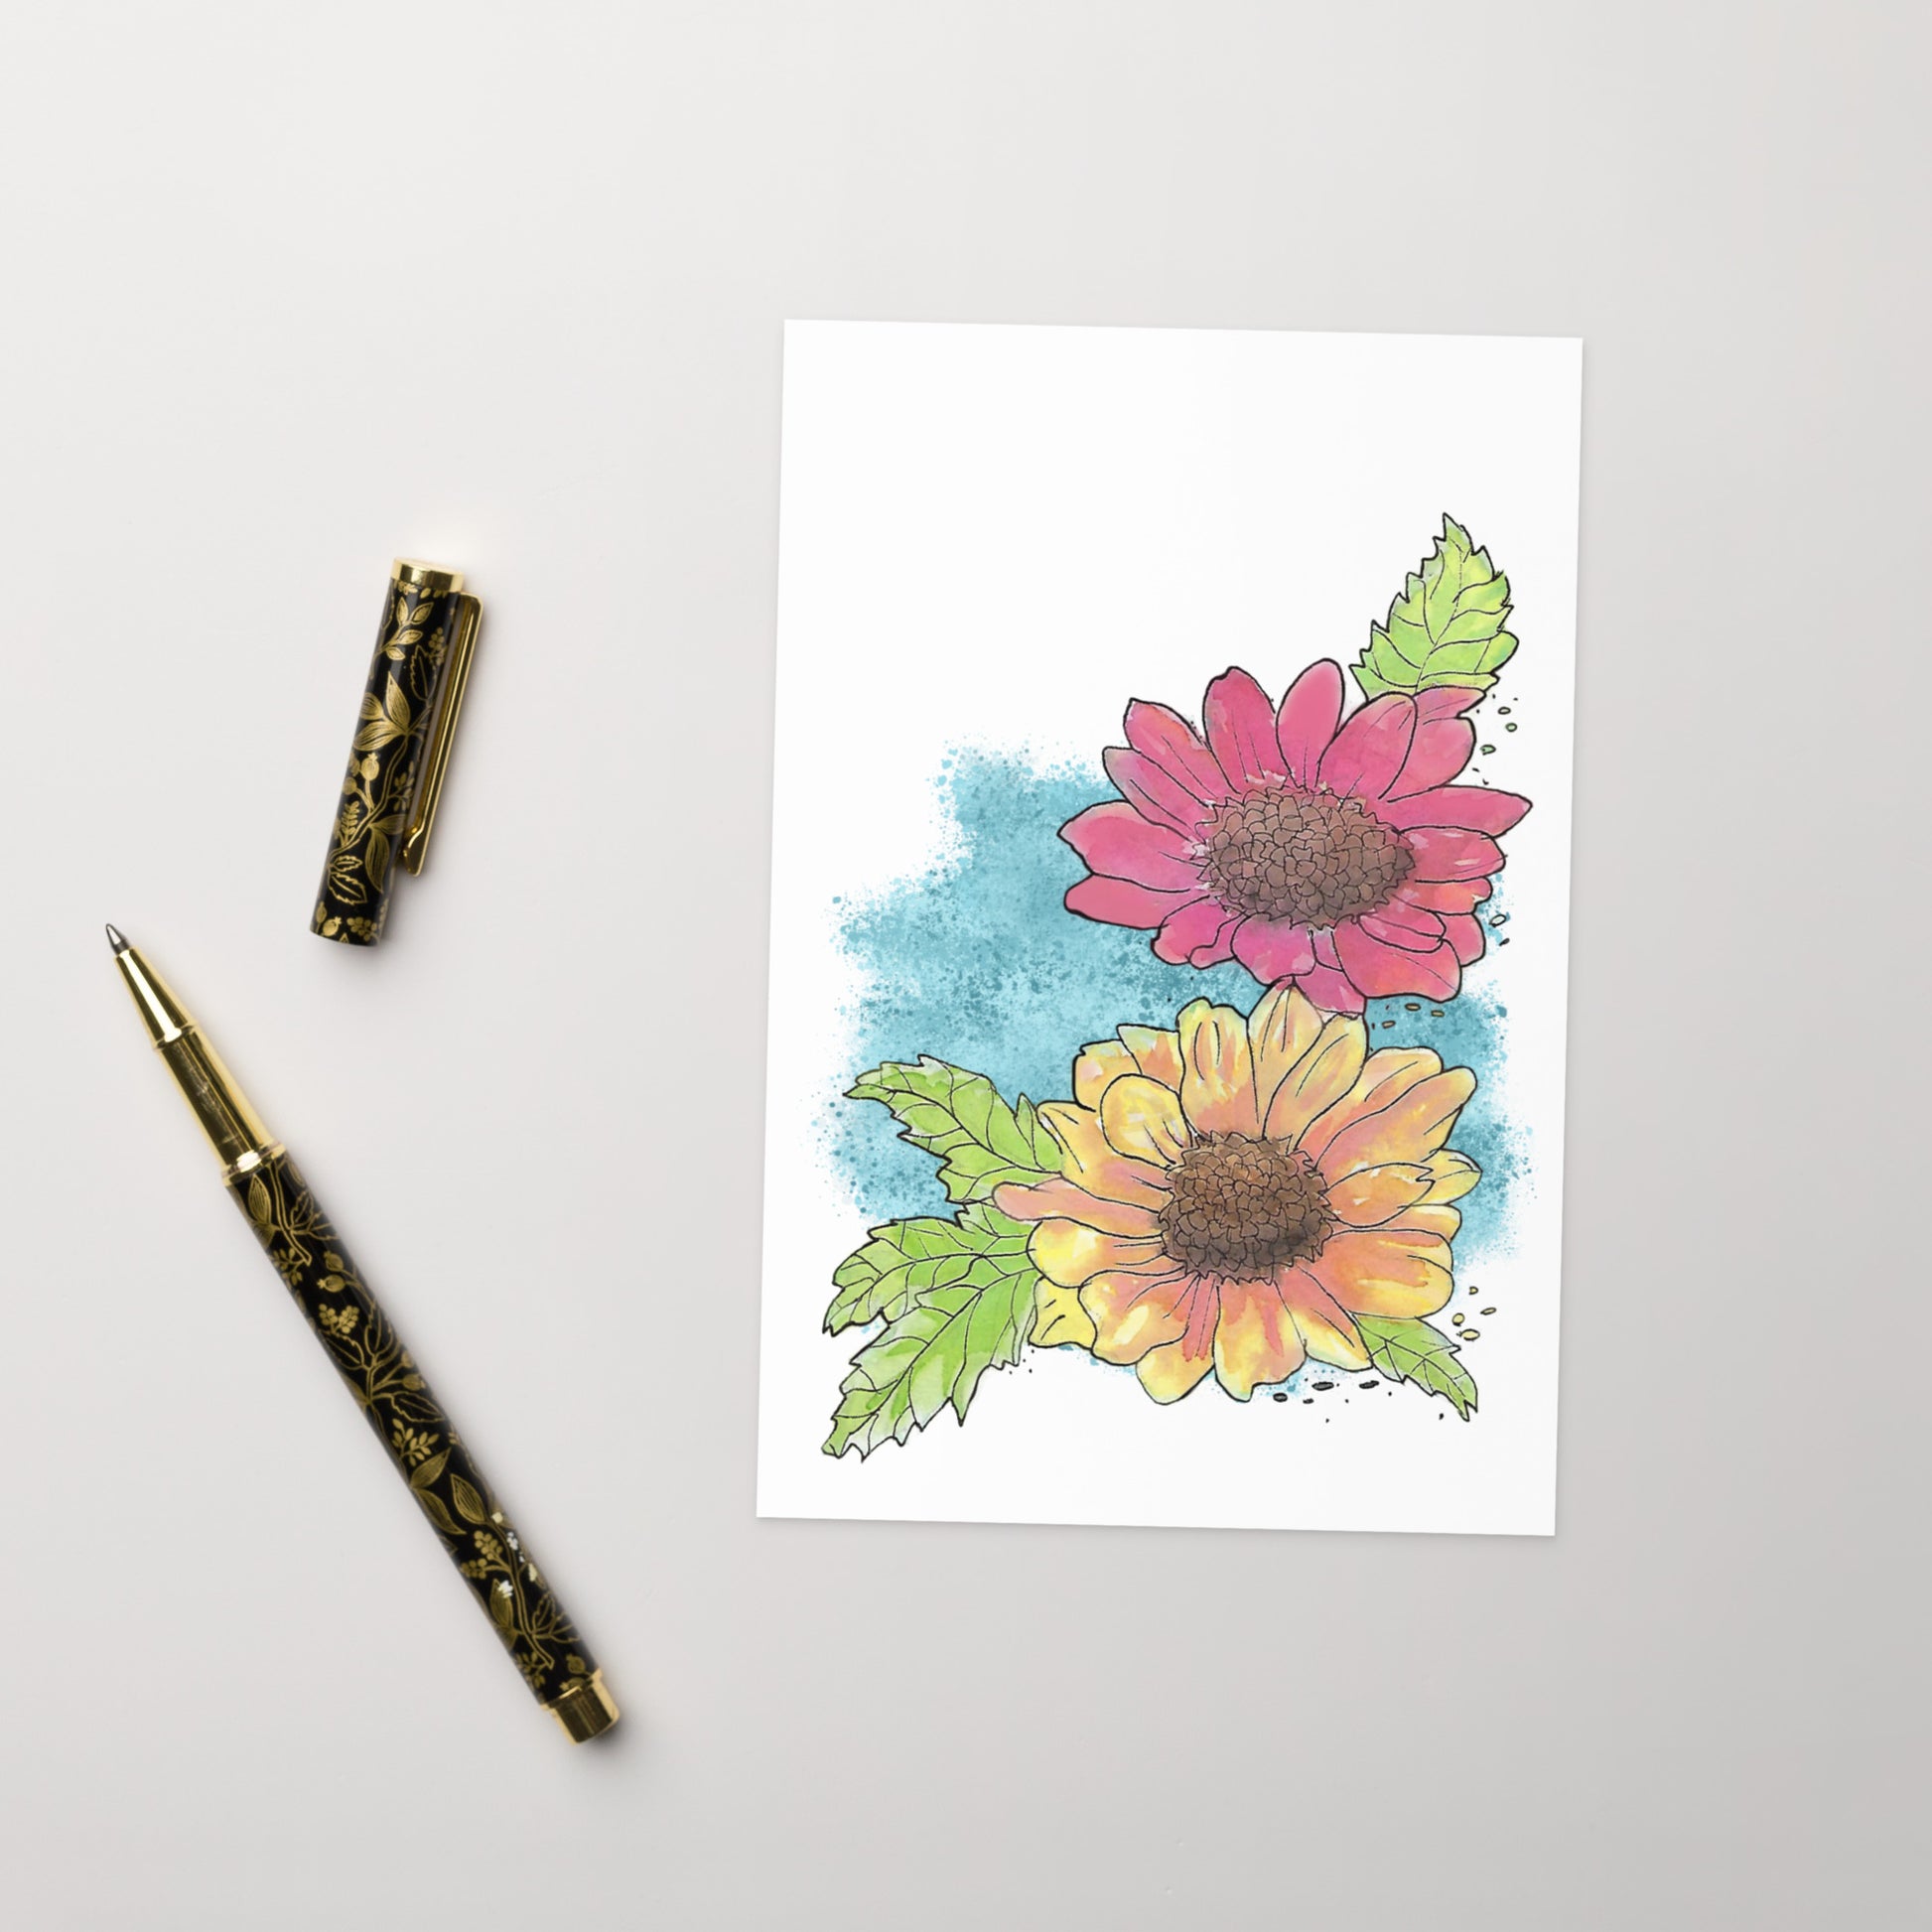 4 by 6 inch watercolor Gerber daisies greeting card and envelope. Has watercolor daisies on the front. The inside has a blue watercolor border with daisy accents and room for a message. Image shows card front by ballpoint pen.